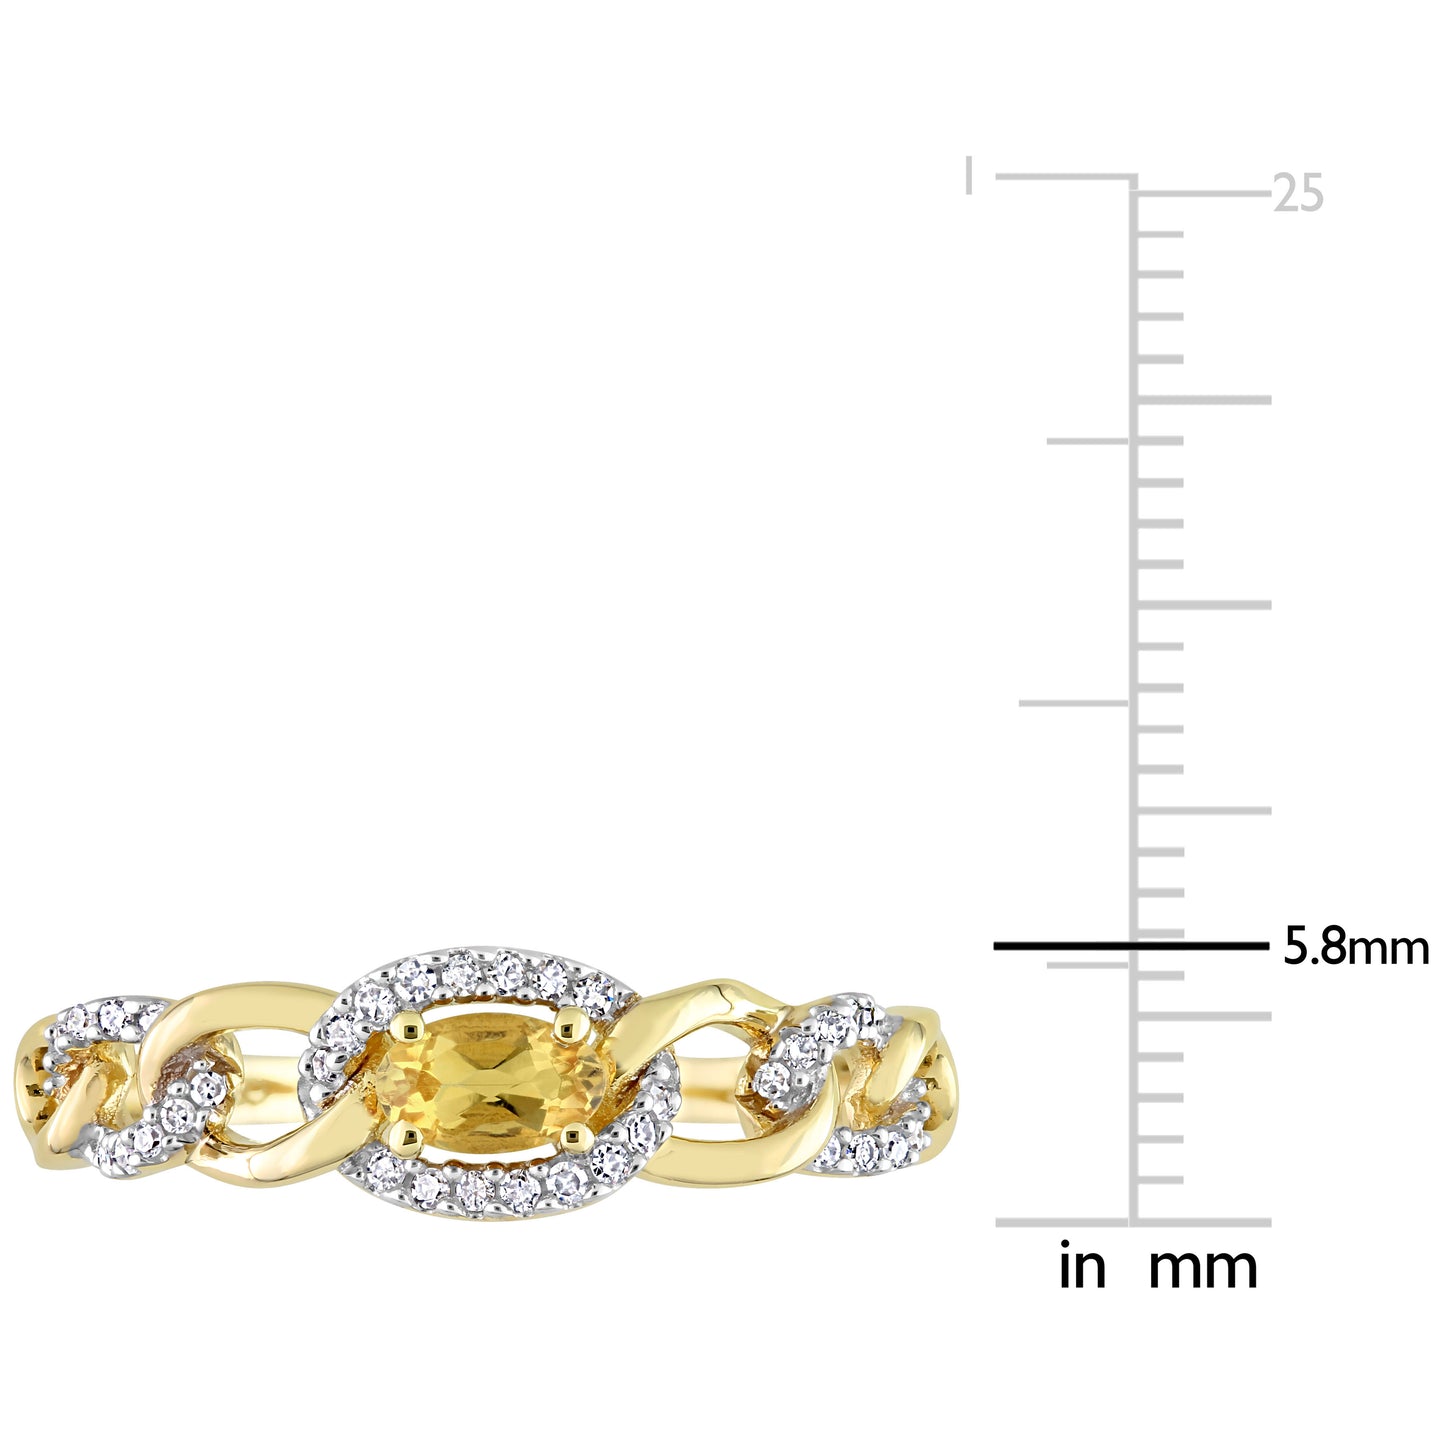 Oval Cut Citrine & Diamond Floating Ring in 10k Yellow Gold